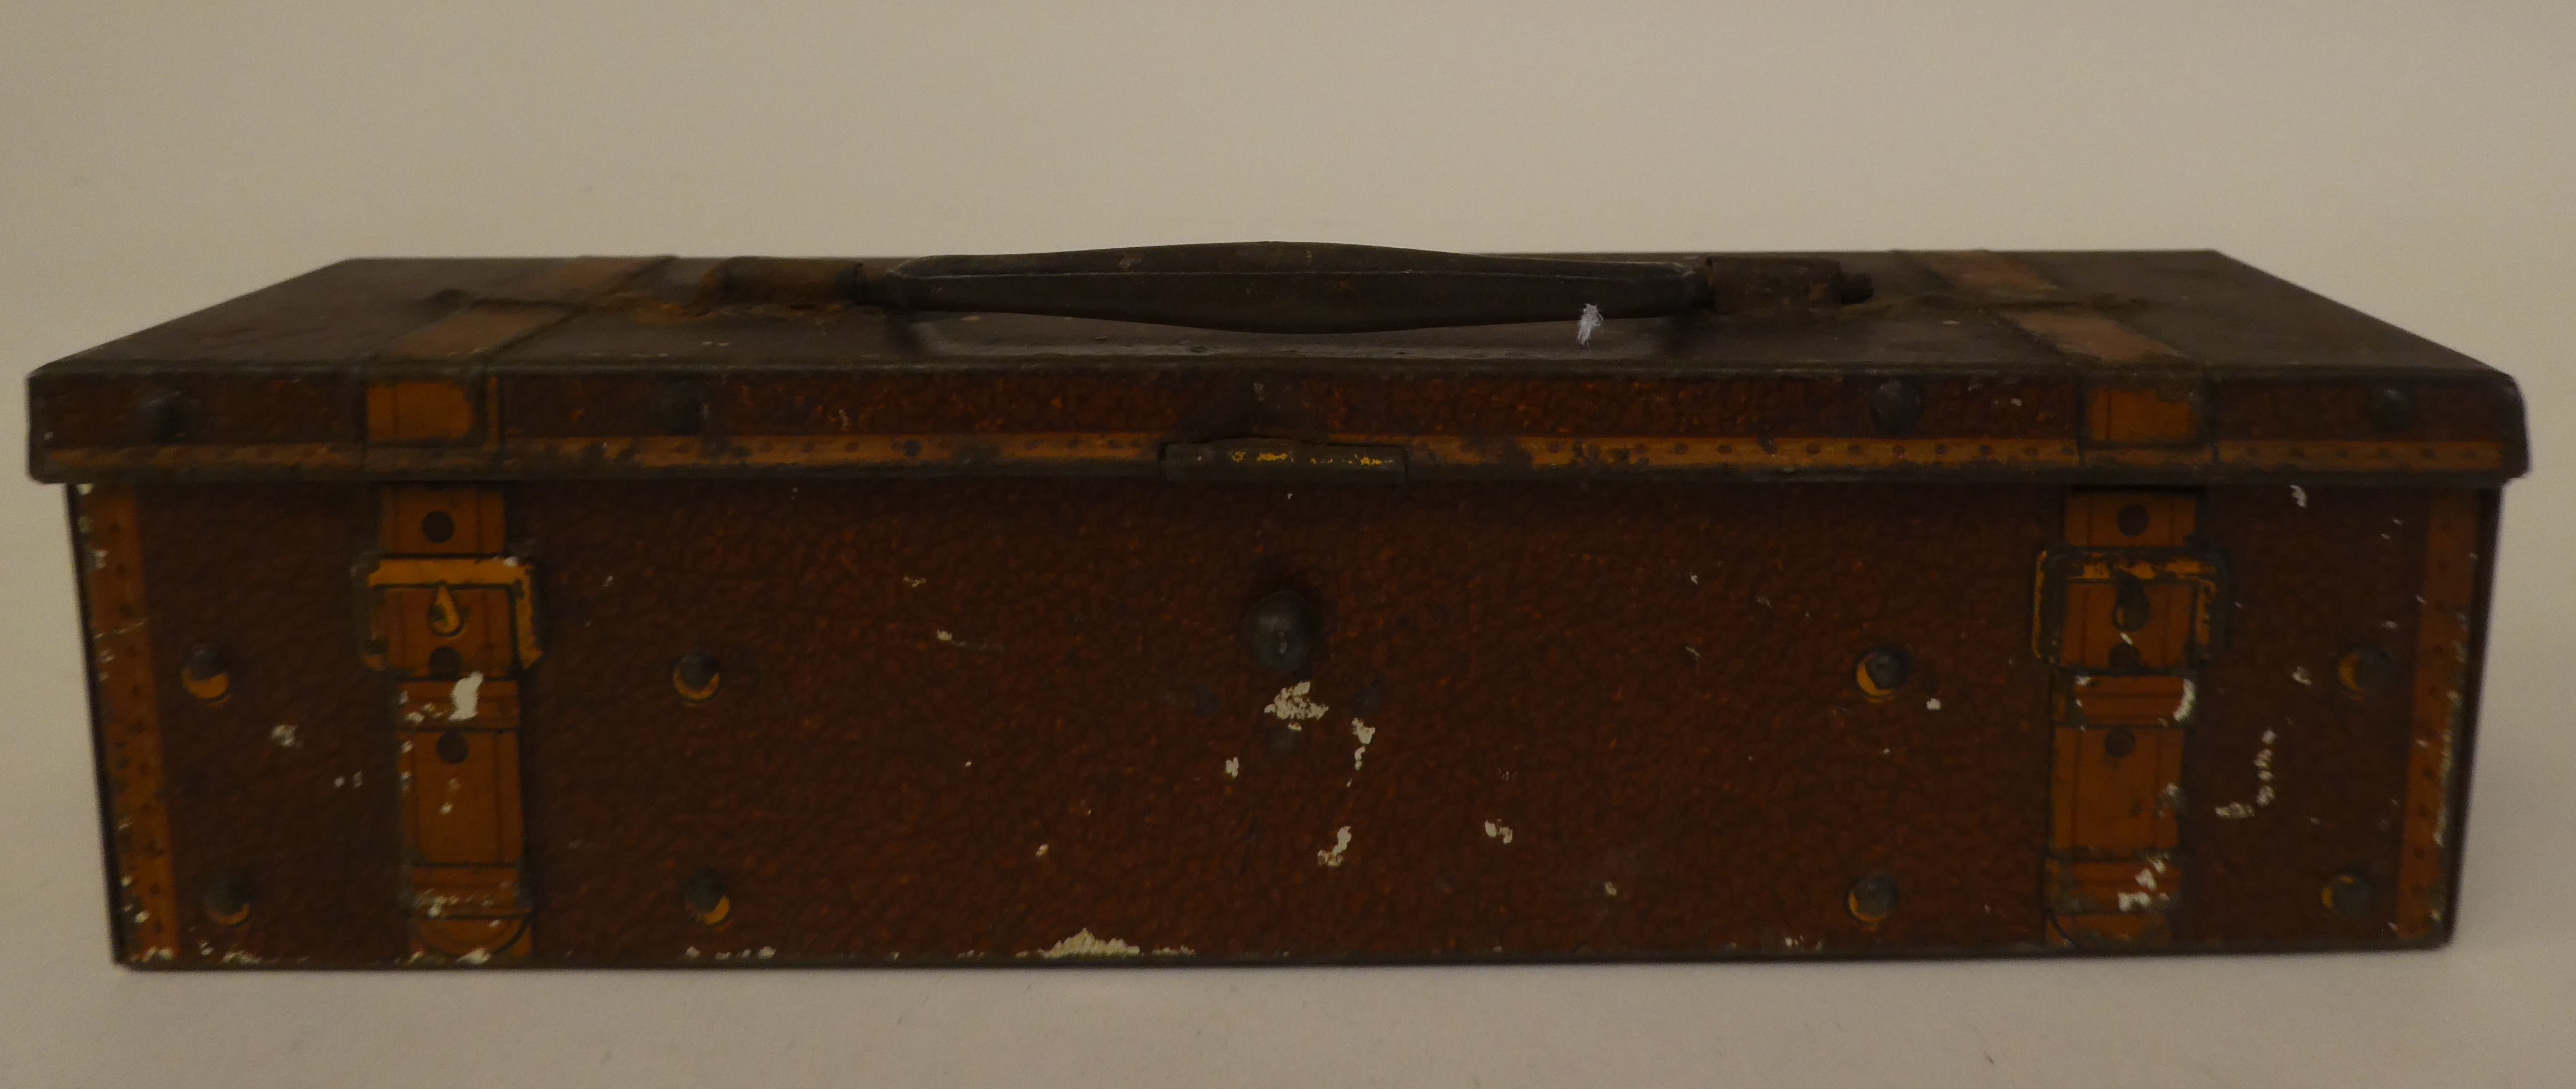 A Vintage Huntley & Palmers printed tinplate biscuit box, fashioned as a trunk with a bail handle - Image 2 of 5